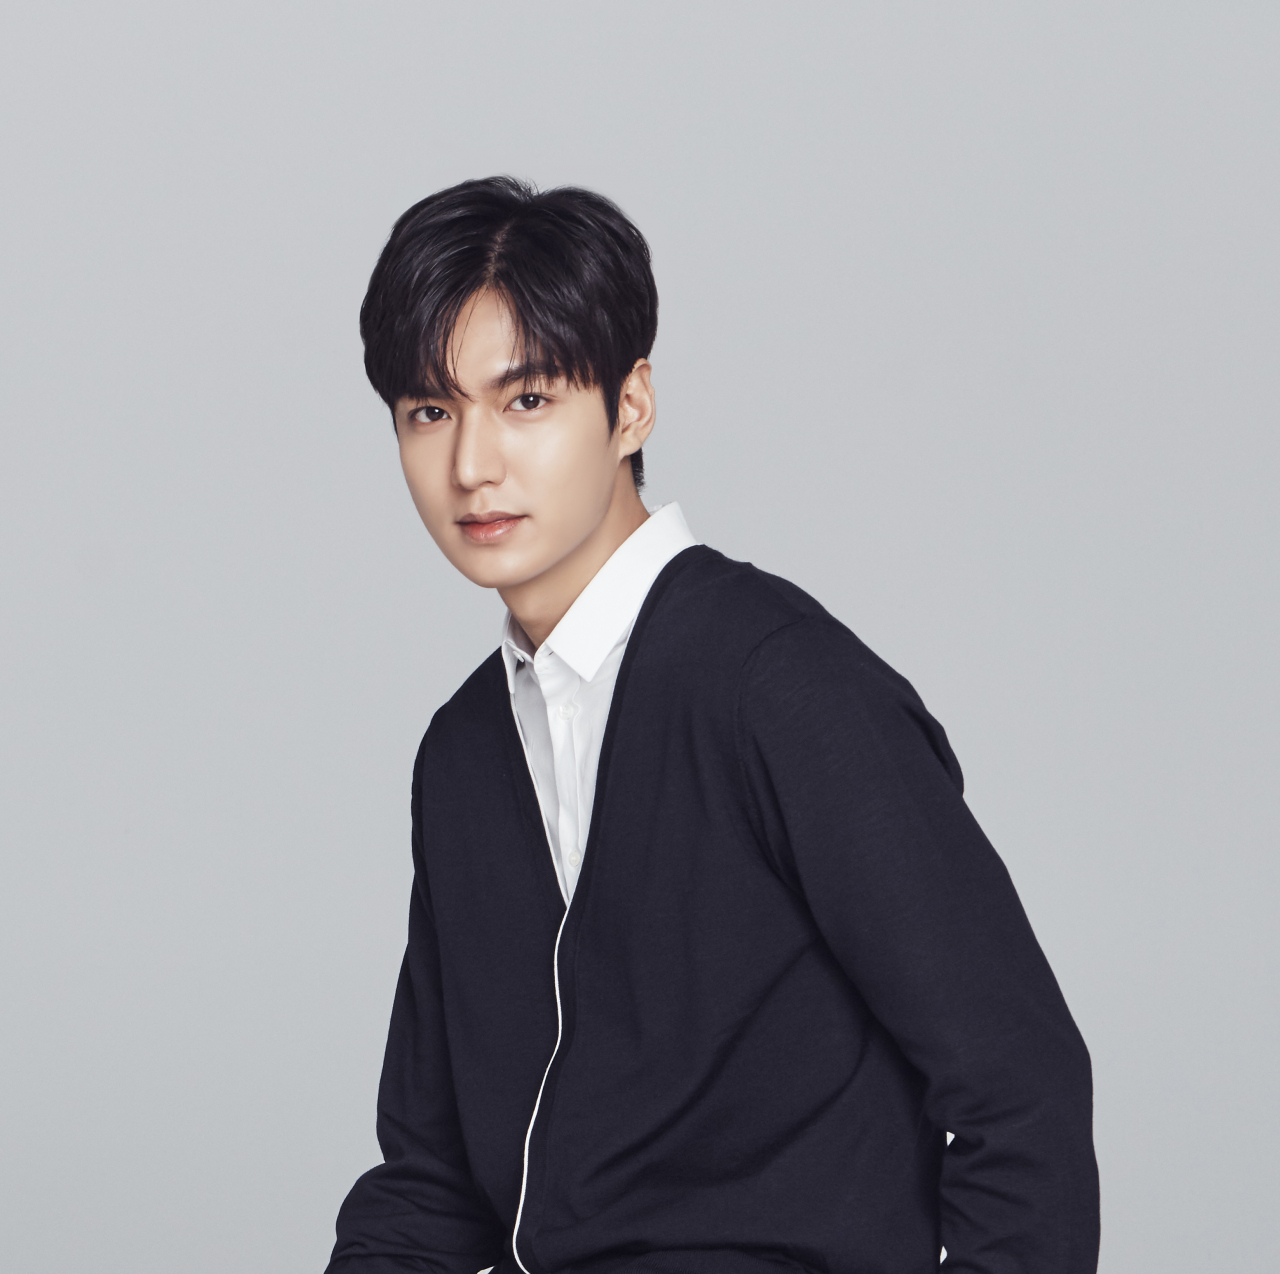 — To help medical staff committed to the treatment of COVID-19.Actor Lee Min-ho also stepped out for those who are having a hard time with COVID-19.Lee Min-ho and his agency MYM Entertainment donated 300 million won for COVID-19 through the Donation platform Promise (PROMIZ) on the 2nd, including the Social Welfare Community Chest (berth of love), International Relief Development NGO Good Neighbors, Hope Bridge All States Disaster Relief Association, Save the Childrens Foundation, and the Korea Childrens Association It delivered to a total of eight Donation agencies, including three.In particular, the reason why Donation is more special is that Lee Min-ho did not do the Donation by Actors personal name but through Promise (PROMZ) which is practicing sharing with fans.It is because it is meaningful that many people voluntarily participated in gathering their hearts based on the value of mutual benefit to experience difficulties and joy, overcome and live together.The Donation Fund will be used quickly to purchase low-income, which needs help in all states, including Daegu and Gyeongbuk, personal hygiene products for the prevention of infection in children with immunodeficient classes, and anti-virus products for medical staff suffering from COVID-19 treatmentWe decided to Donation in the hope that children in vulnerable groups will be protected safely by preventing the spread of community infection, Promise said. We hope that it will help a little bit of families who are having difficulty purchasing essential anti-virus items such as health masks, He said.In addition, Promise said, I was saddened to hear that all states medical institutions are experiencing a lot of difficulties in the shortage of anti-virus supplies for medical staff and anti-virus workers who are suffering from confirmed patient treatment, and I was hoping that they would help a little bit in their efforts.Lee Min-ho fan club Minoz also donated 7.5 tons of rice to help overcome the low-income damage suffered by Corona 19 and added meaning and warmed up.The items will be delivered to families belonging to children and adolescents in blind spots where they are not properly eaten and cared for.This is not the first time Lee Min-ho has done good.Promise (PROMIZ), which he founded to practice sharing with fans, is a sharing donation platform that has consistently pursued the value of Fun Donation since its inception in March 2014 and has been awarding good brand targets for three consecutive years.We have realized the shared value by producing small business owners and designer products that reexamine the value of various social contribution campaigns with the theme of children, environment, and animals, and donating the proceeds of sales for the development of our society.In particular, Actor Lee Min-ho is a member of UNICEF Anus Club (a personal Donation group of more than KRW 100 million) as well as a local marginalized group.Meanwhile, Lee Min-ho is currently in the midst of filming as the emperor Lee Gon in SBSs Golden Earth Drama Ducking: The Monarch of Eternity scheduled to air in April.